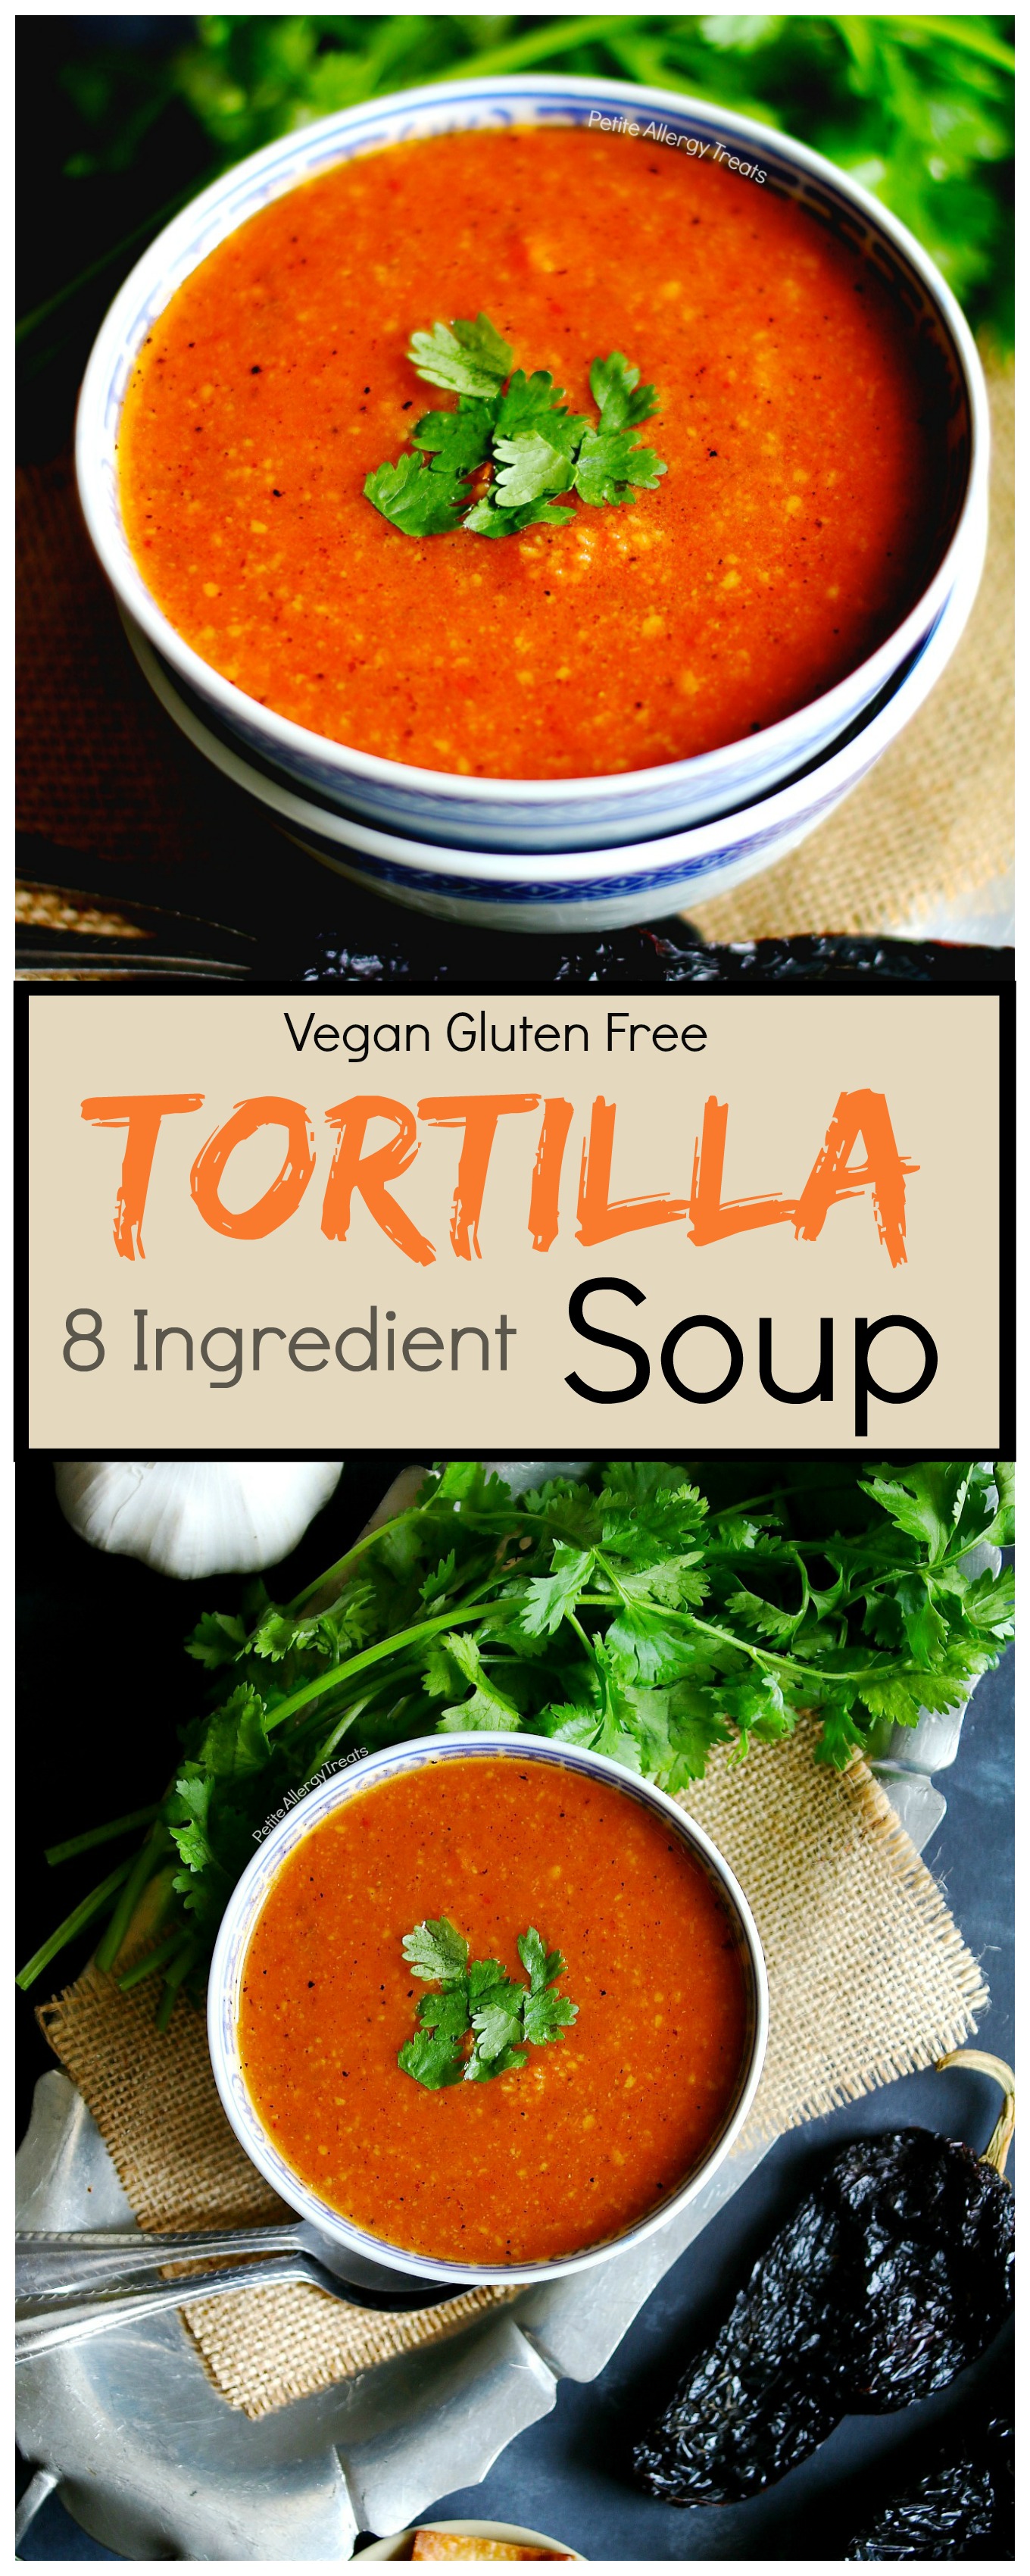 Healthy Tortilla Soup recipe (vegan)- Gluten Free flavorful soup with 8 ingredients. Food Allergy friendly dinner is ready!